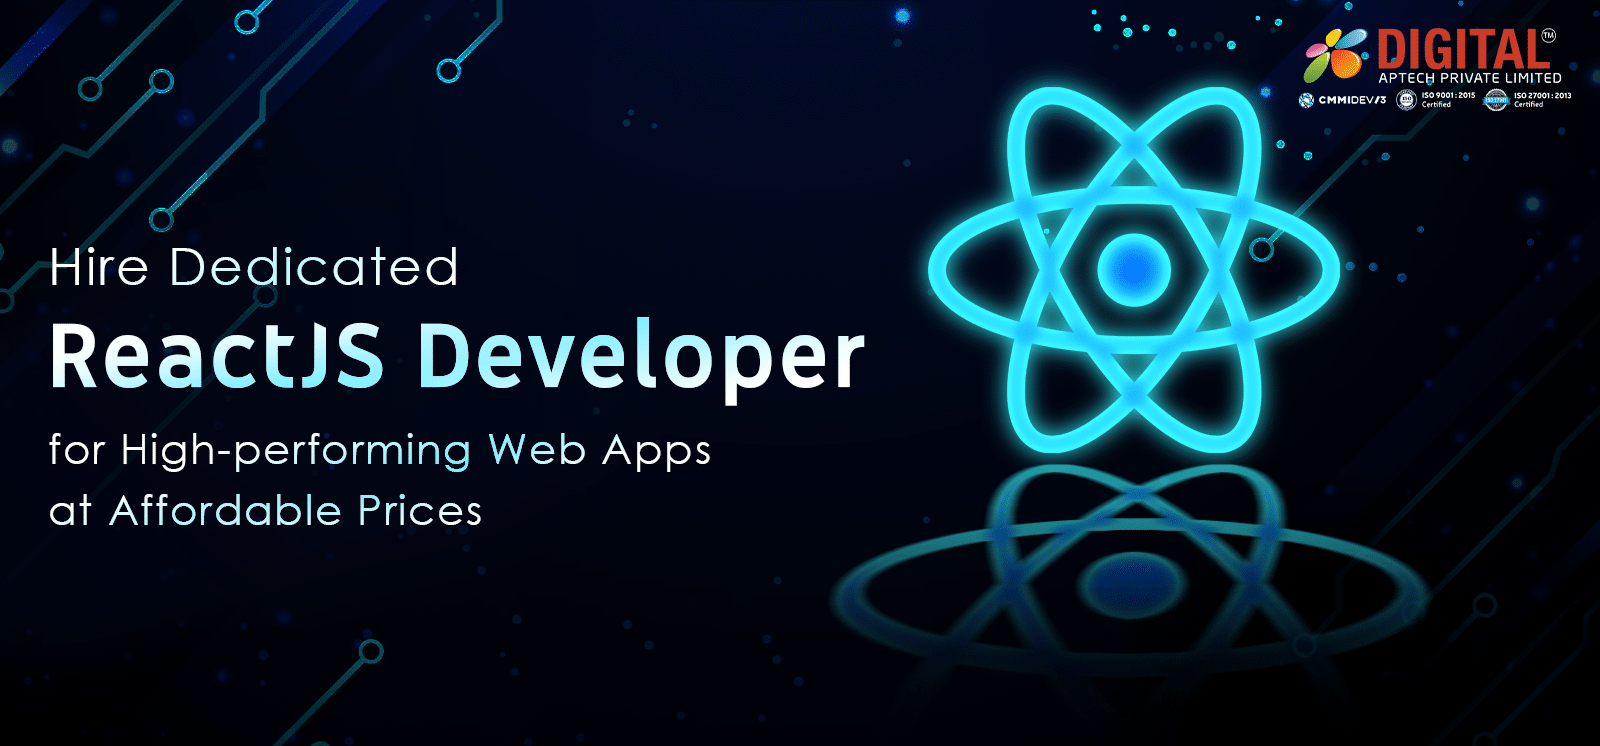 Hire Dedicated ReactJS Developers for High-performing Web Apps at Affordable Prices